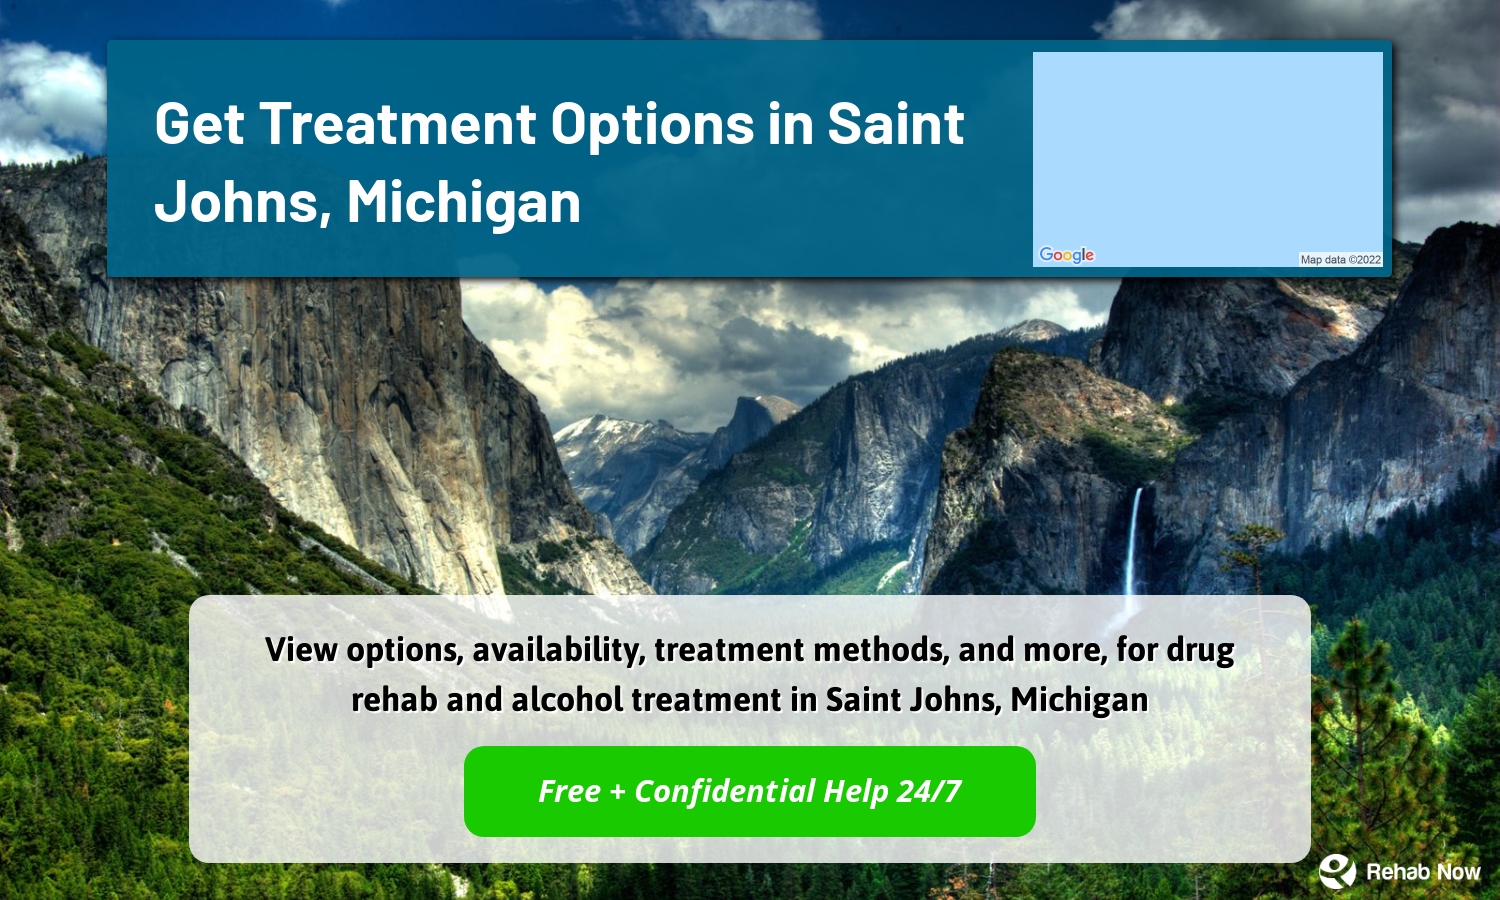 View options, availability, treatment methods, and more, for drug rehab and alcohol treatment in Saint Johns, Michigan